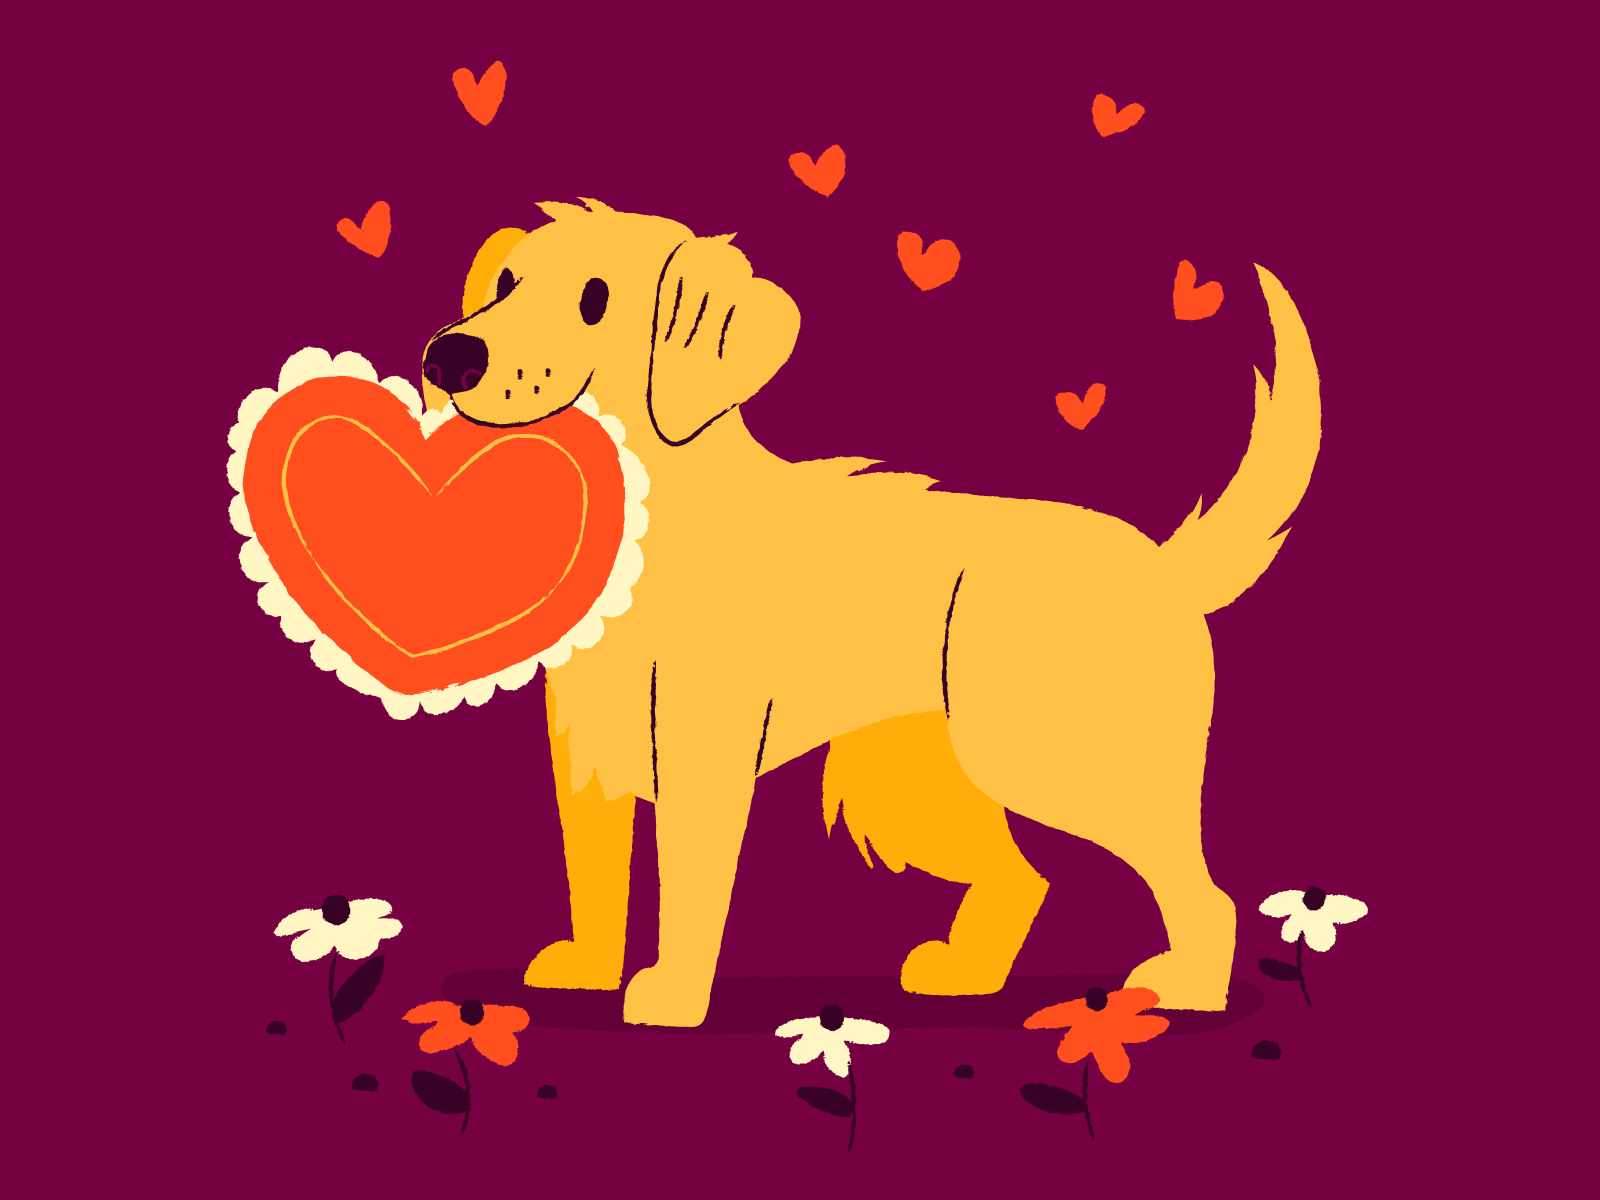 dog-valentine-s-day-by-anna-hurley-on-dribbble